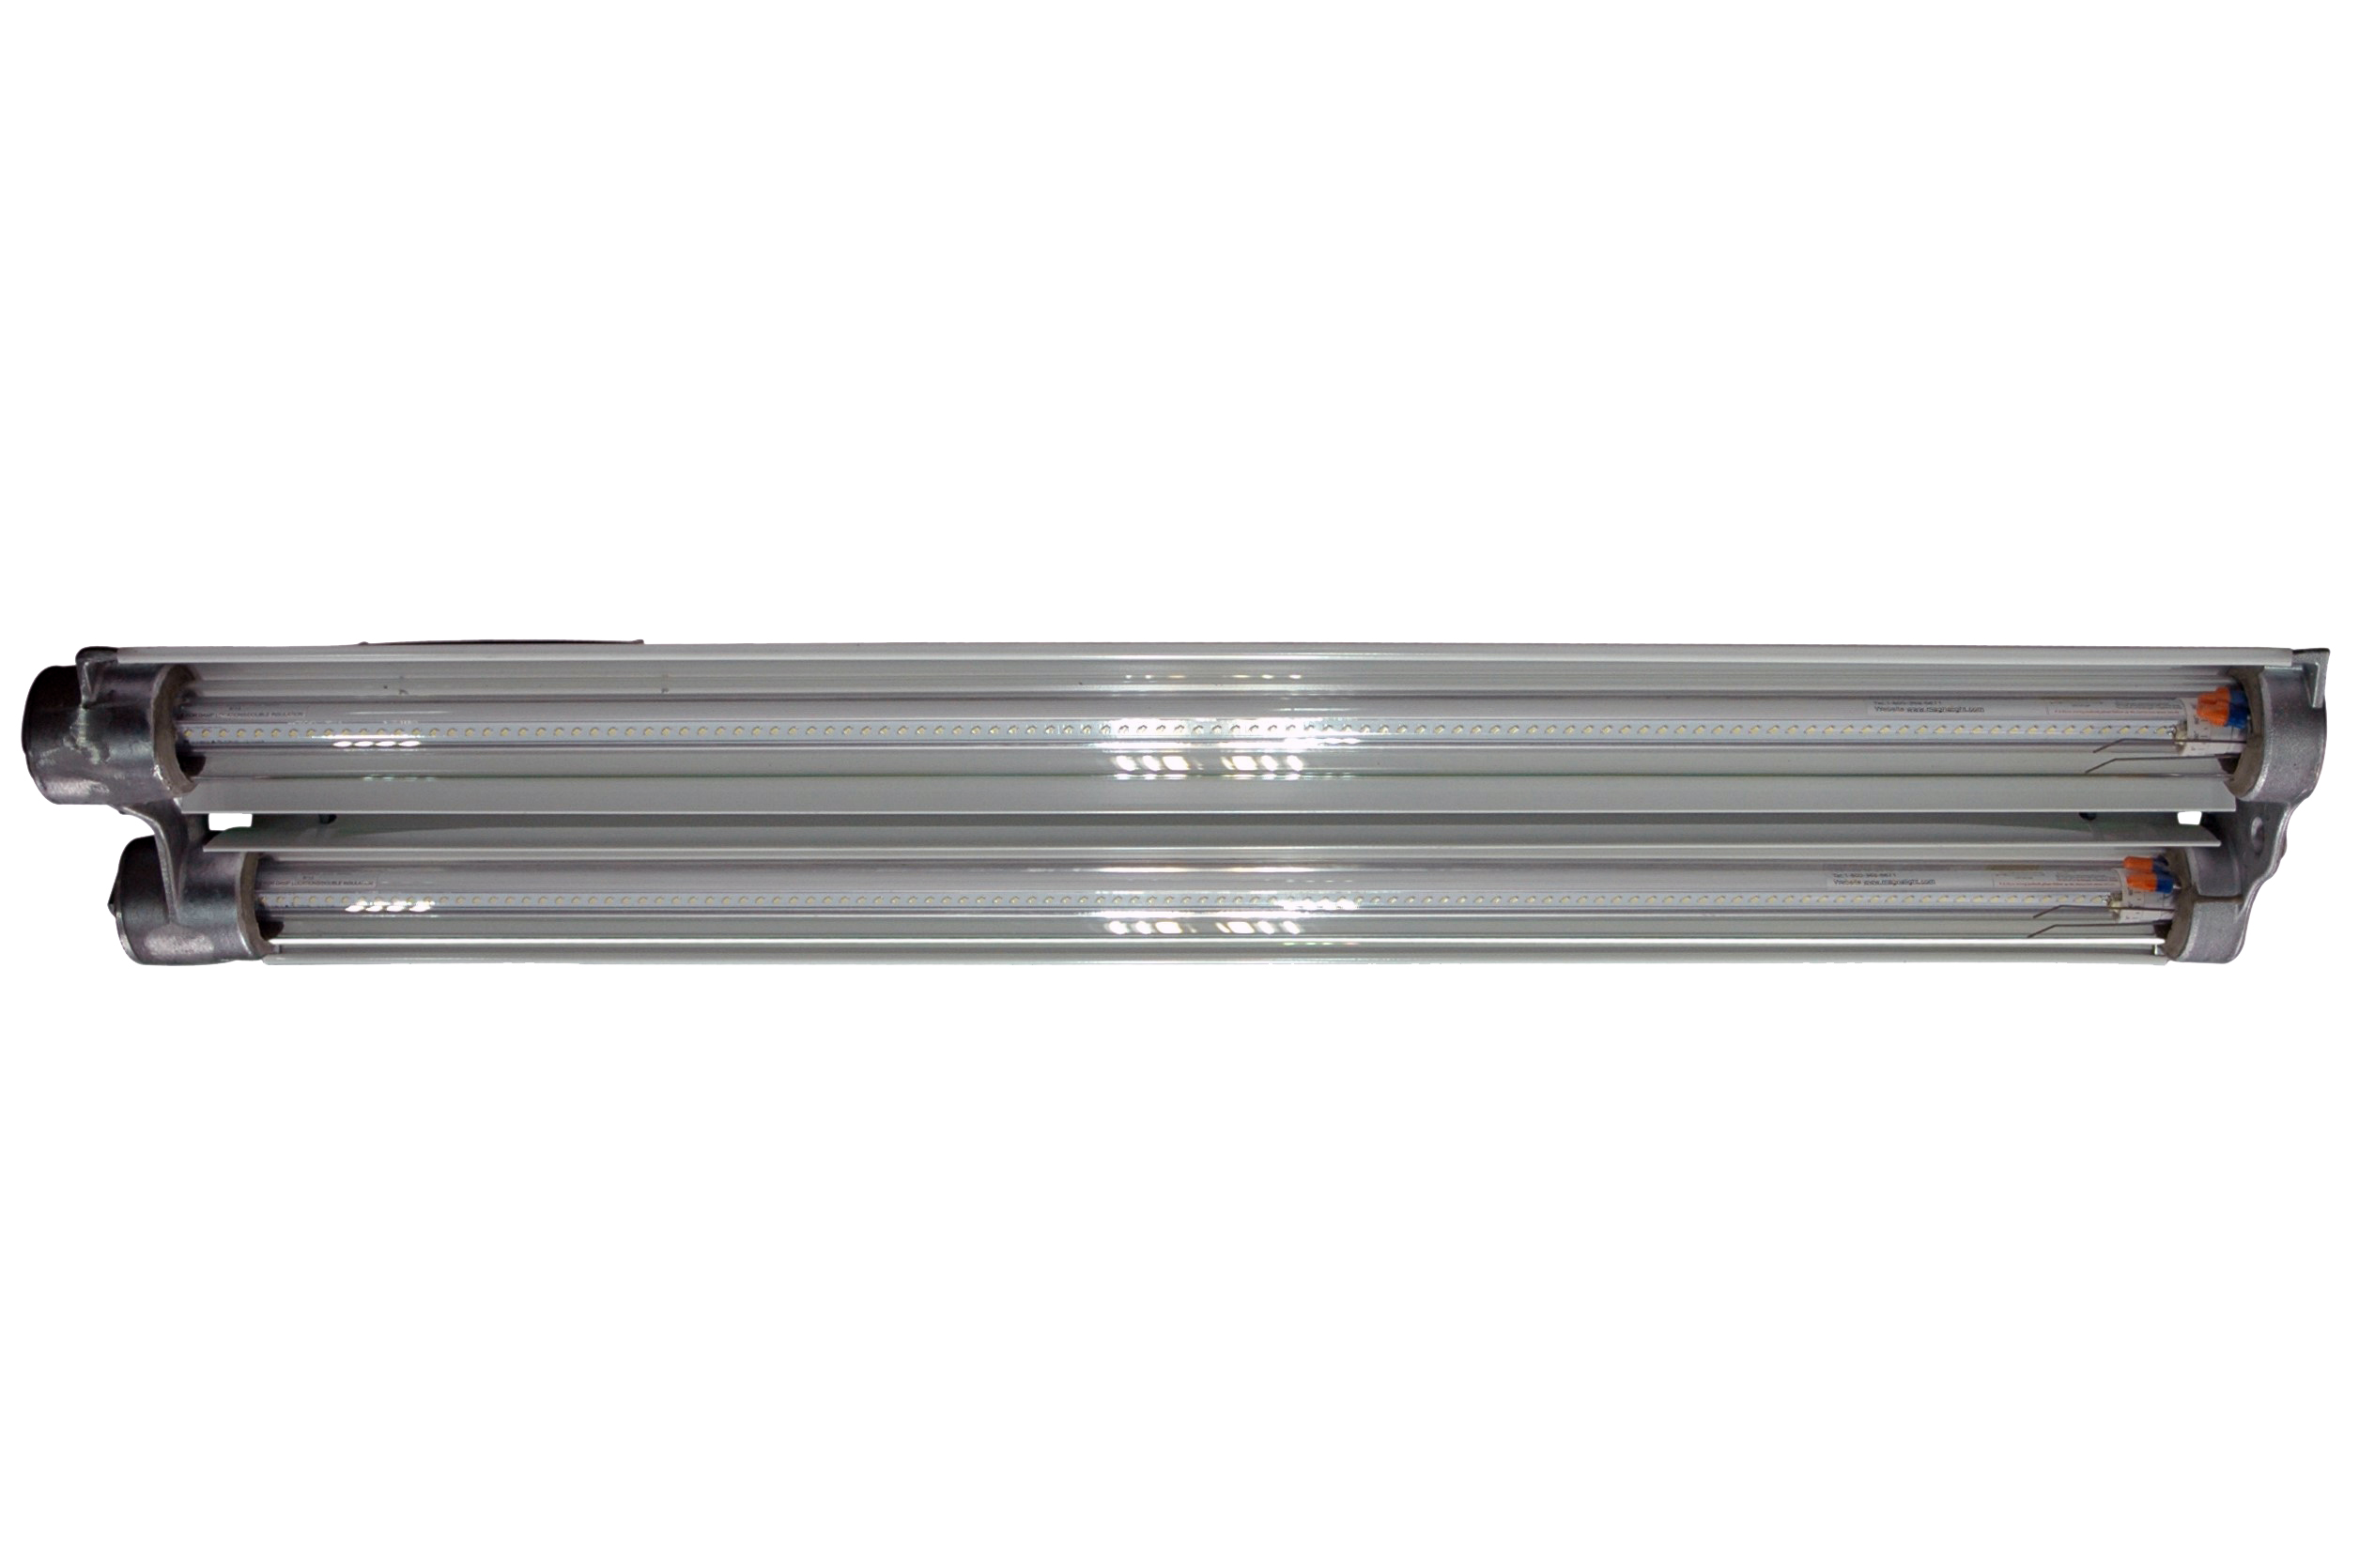 Class 1 Division 1 LED Light Fixture with Dimming Capabilities